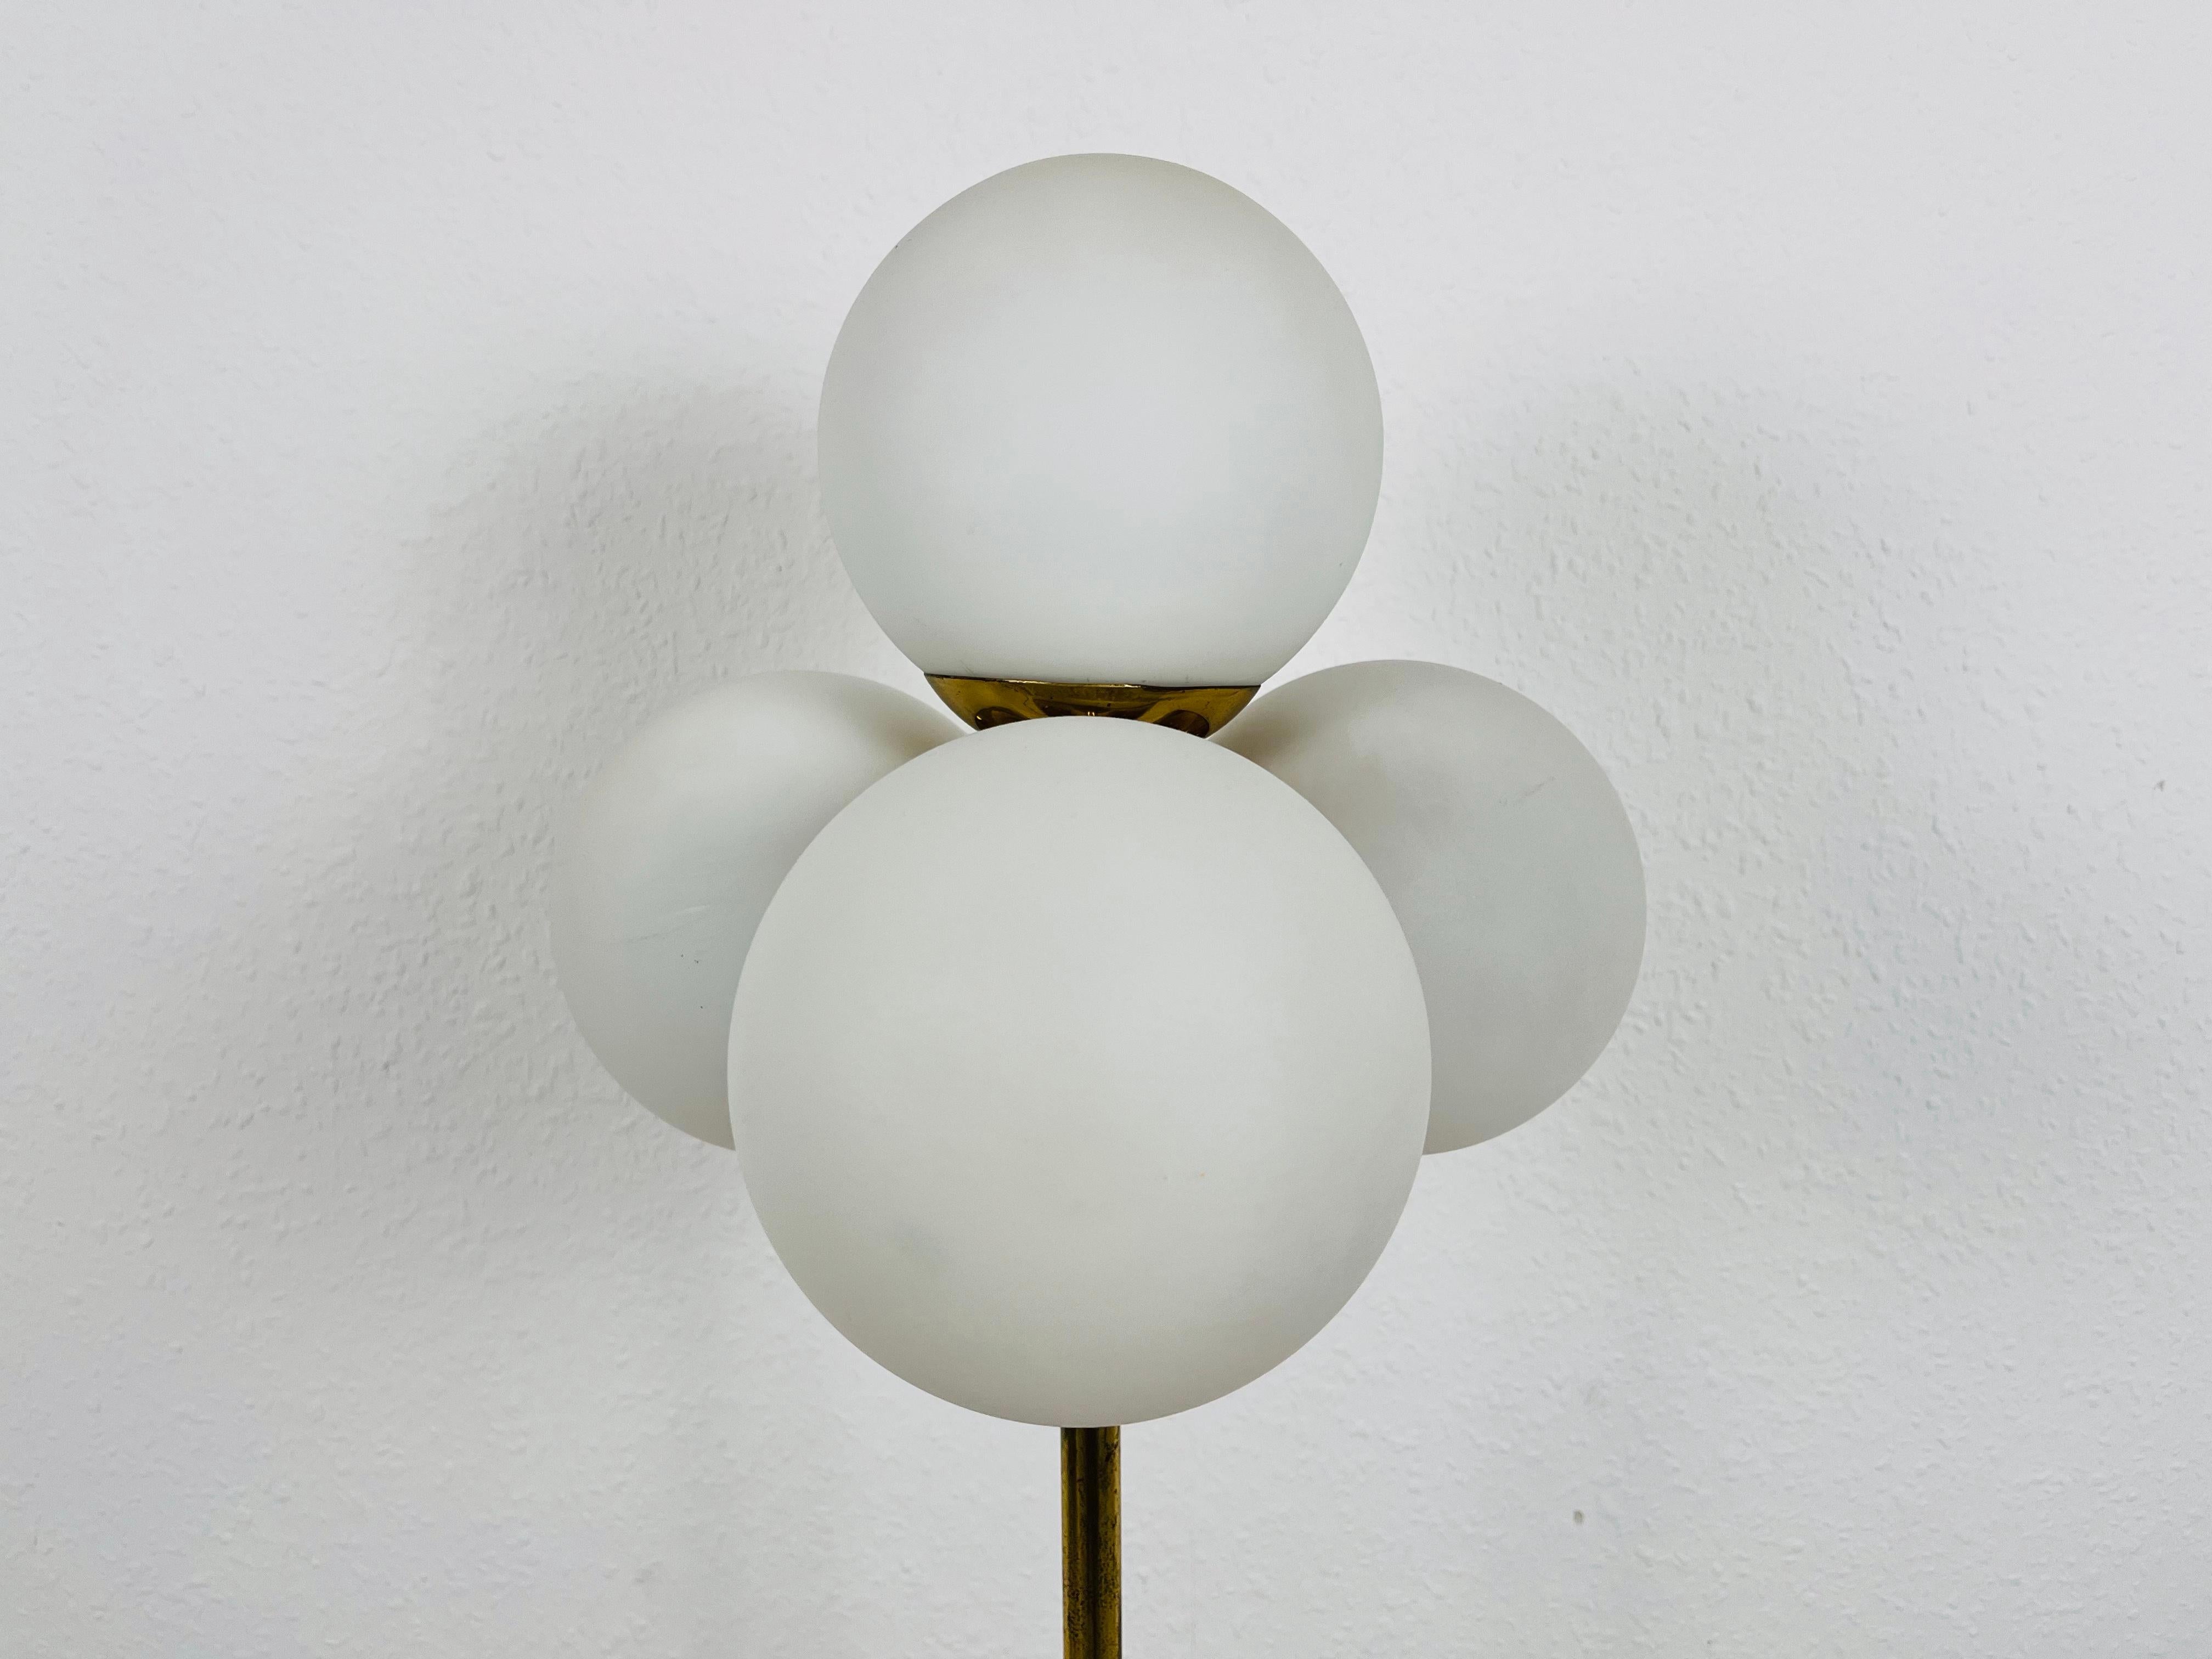 Metal Midcentury Brass and Opaline Glass 4-Arm Floor Lamp by Kaiser, Germany, 1960s For Sale